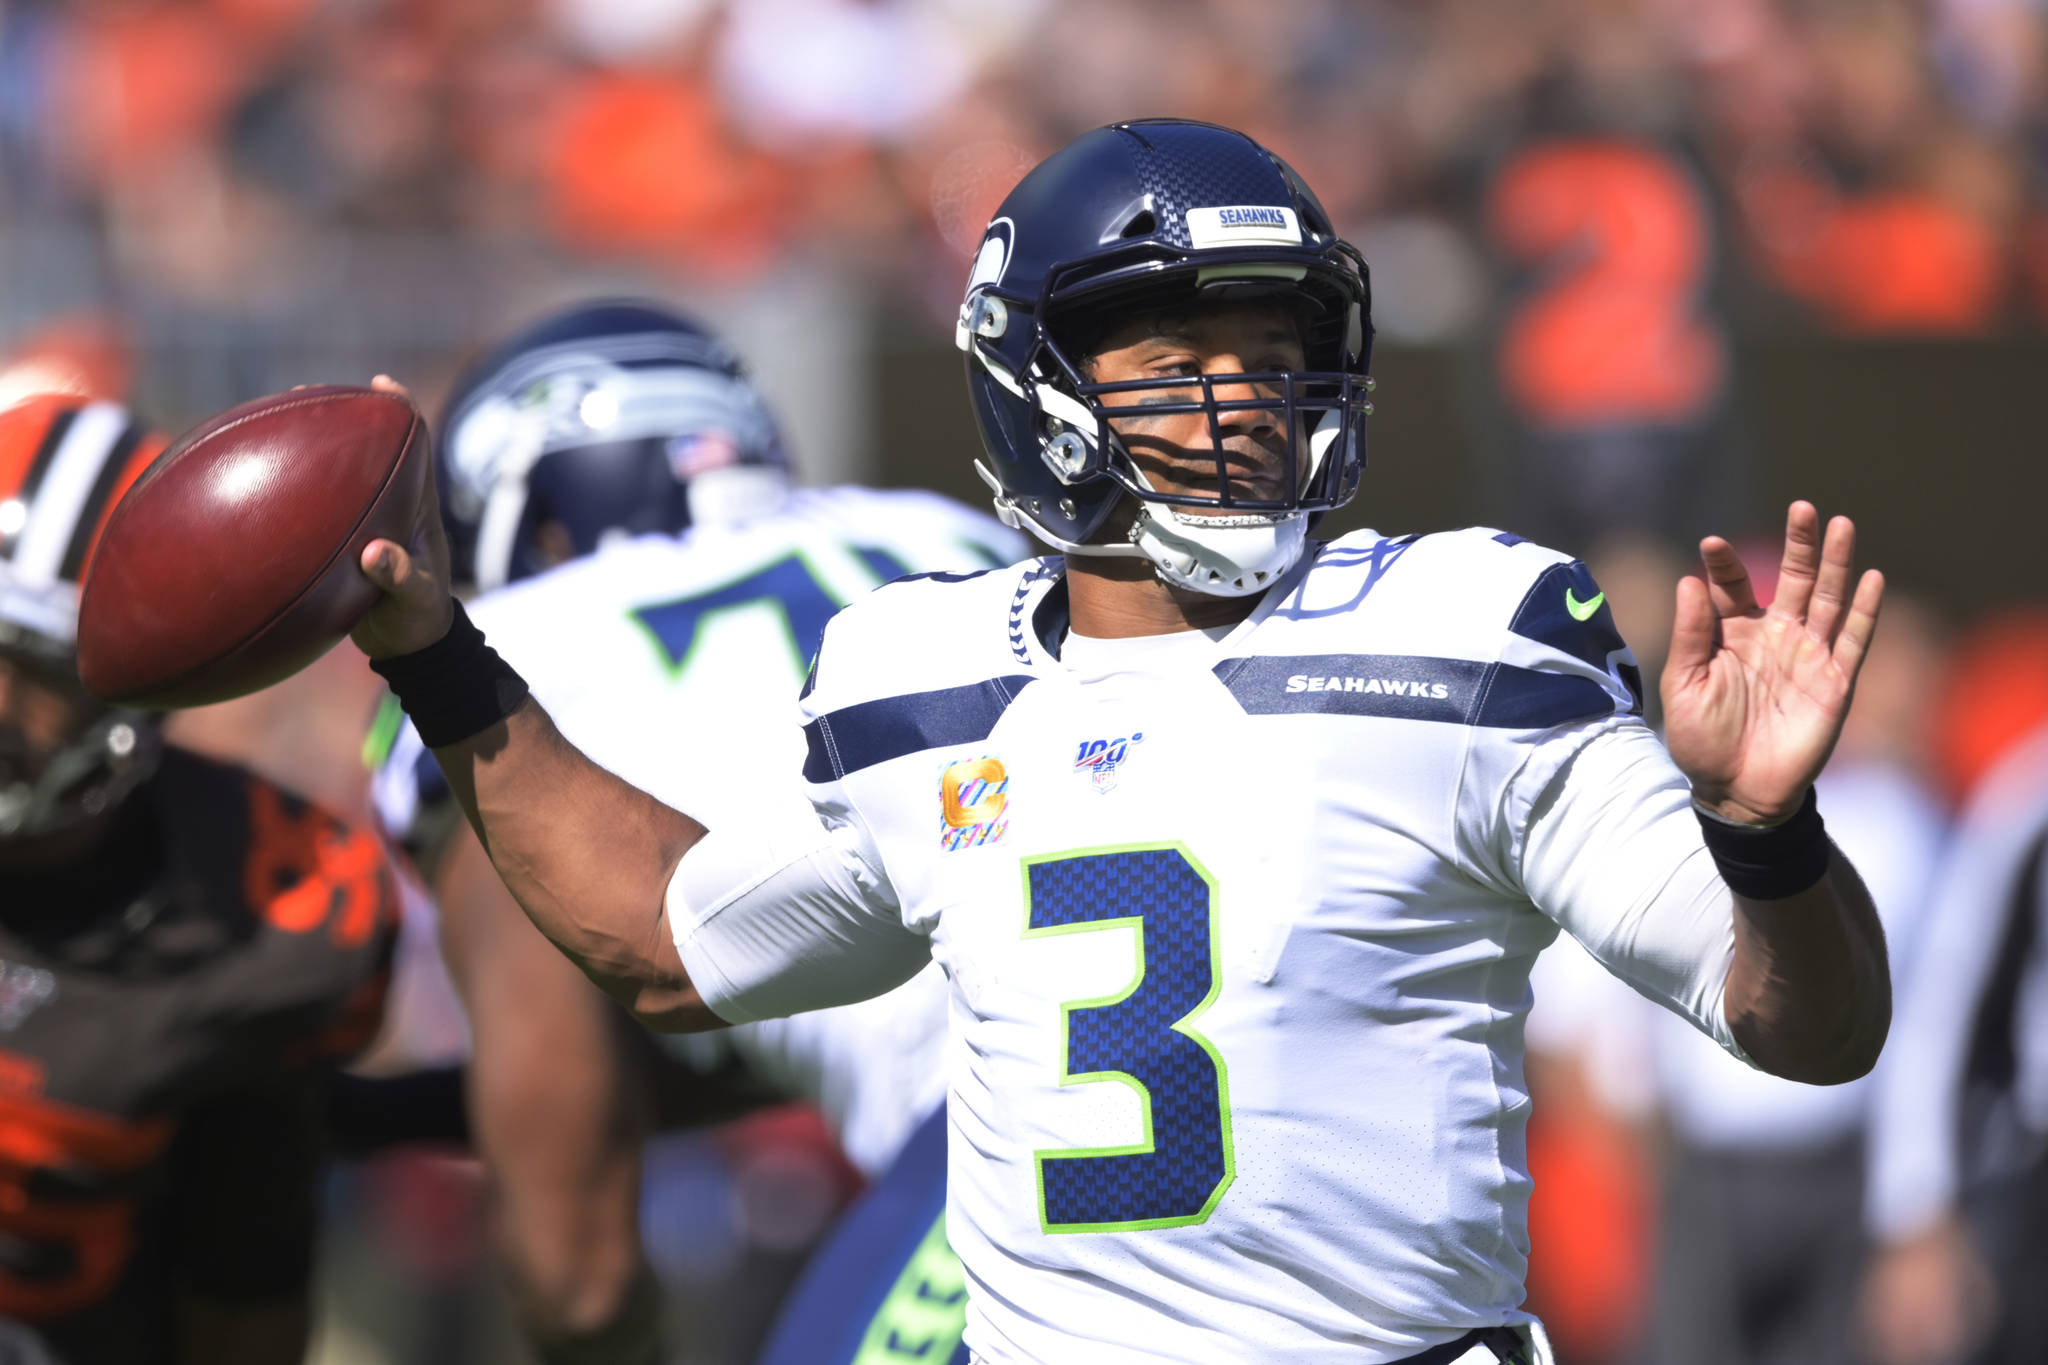 Seattle Seahawks quarterback Russell Wilson completed 23 of 33 passes for 299 yards and two touchdowns Sunday in a 32-28 win over the Cleveland Browns. (AP Photo/David Richard)